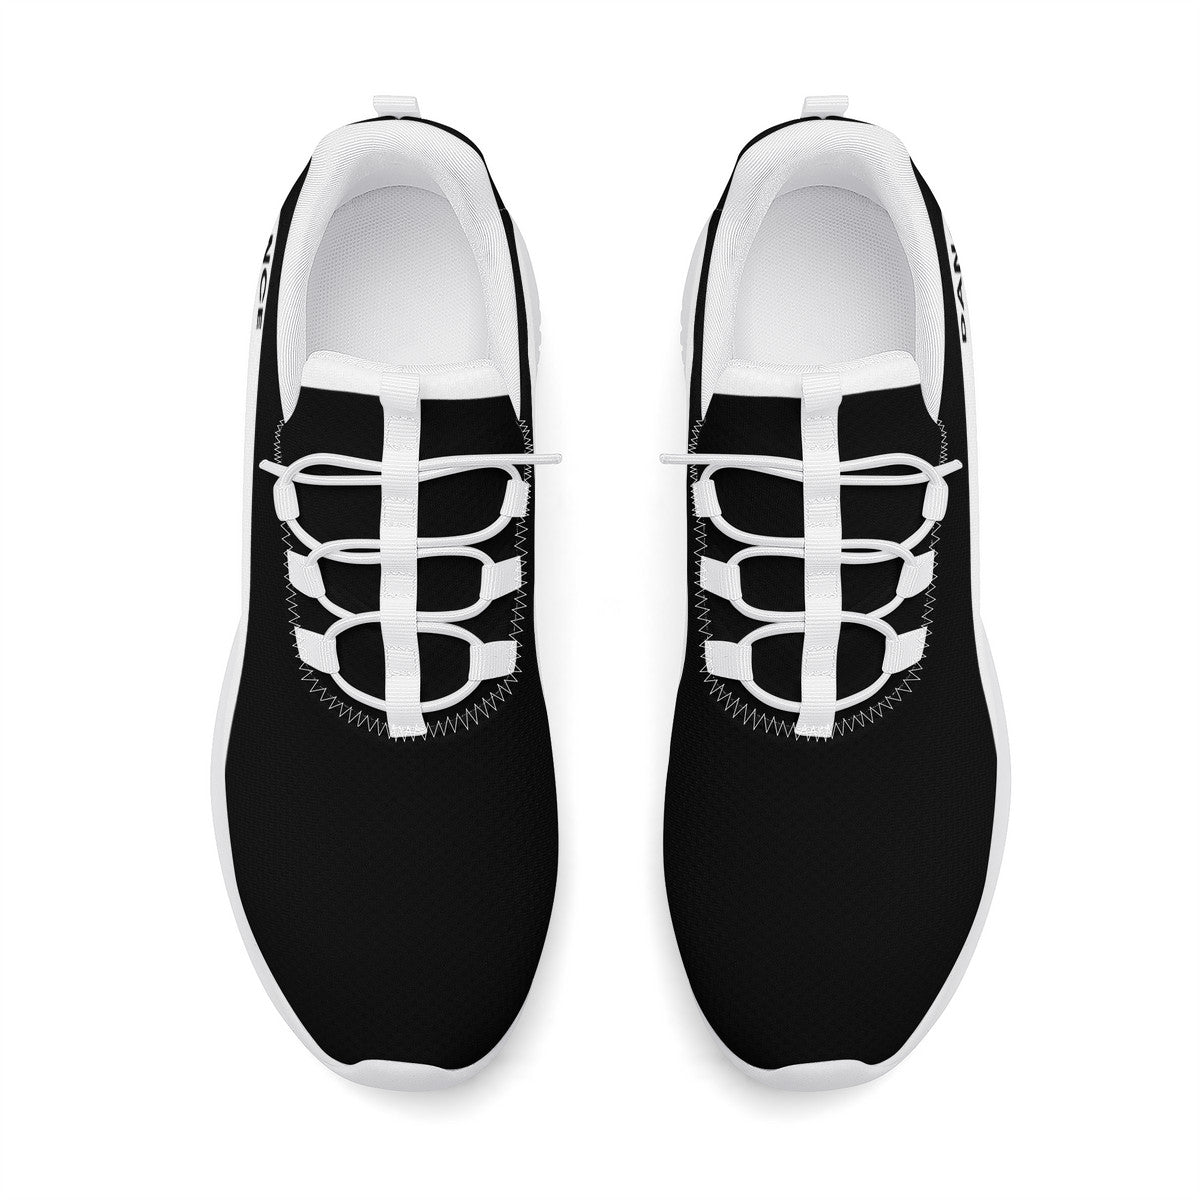 Dance Sneakers - Black and White